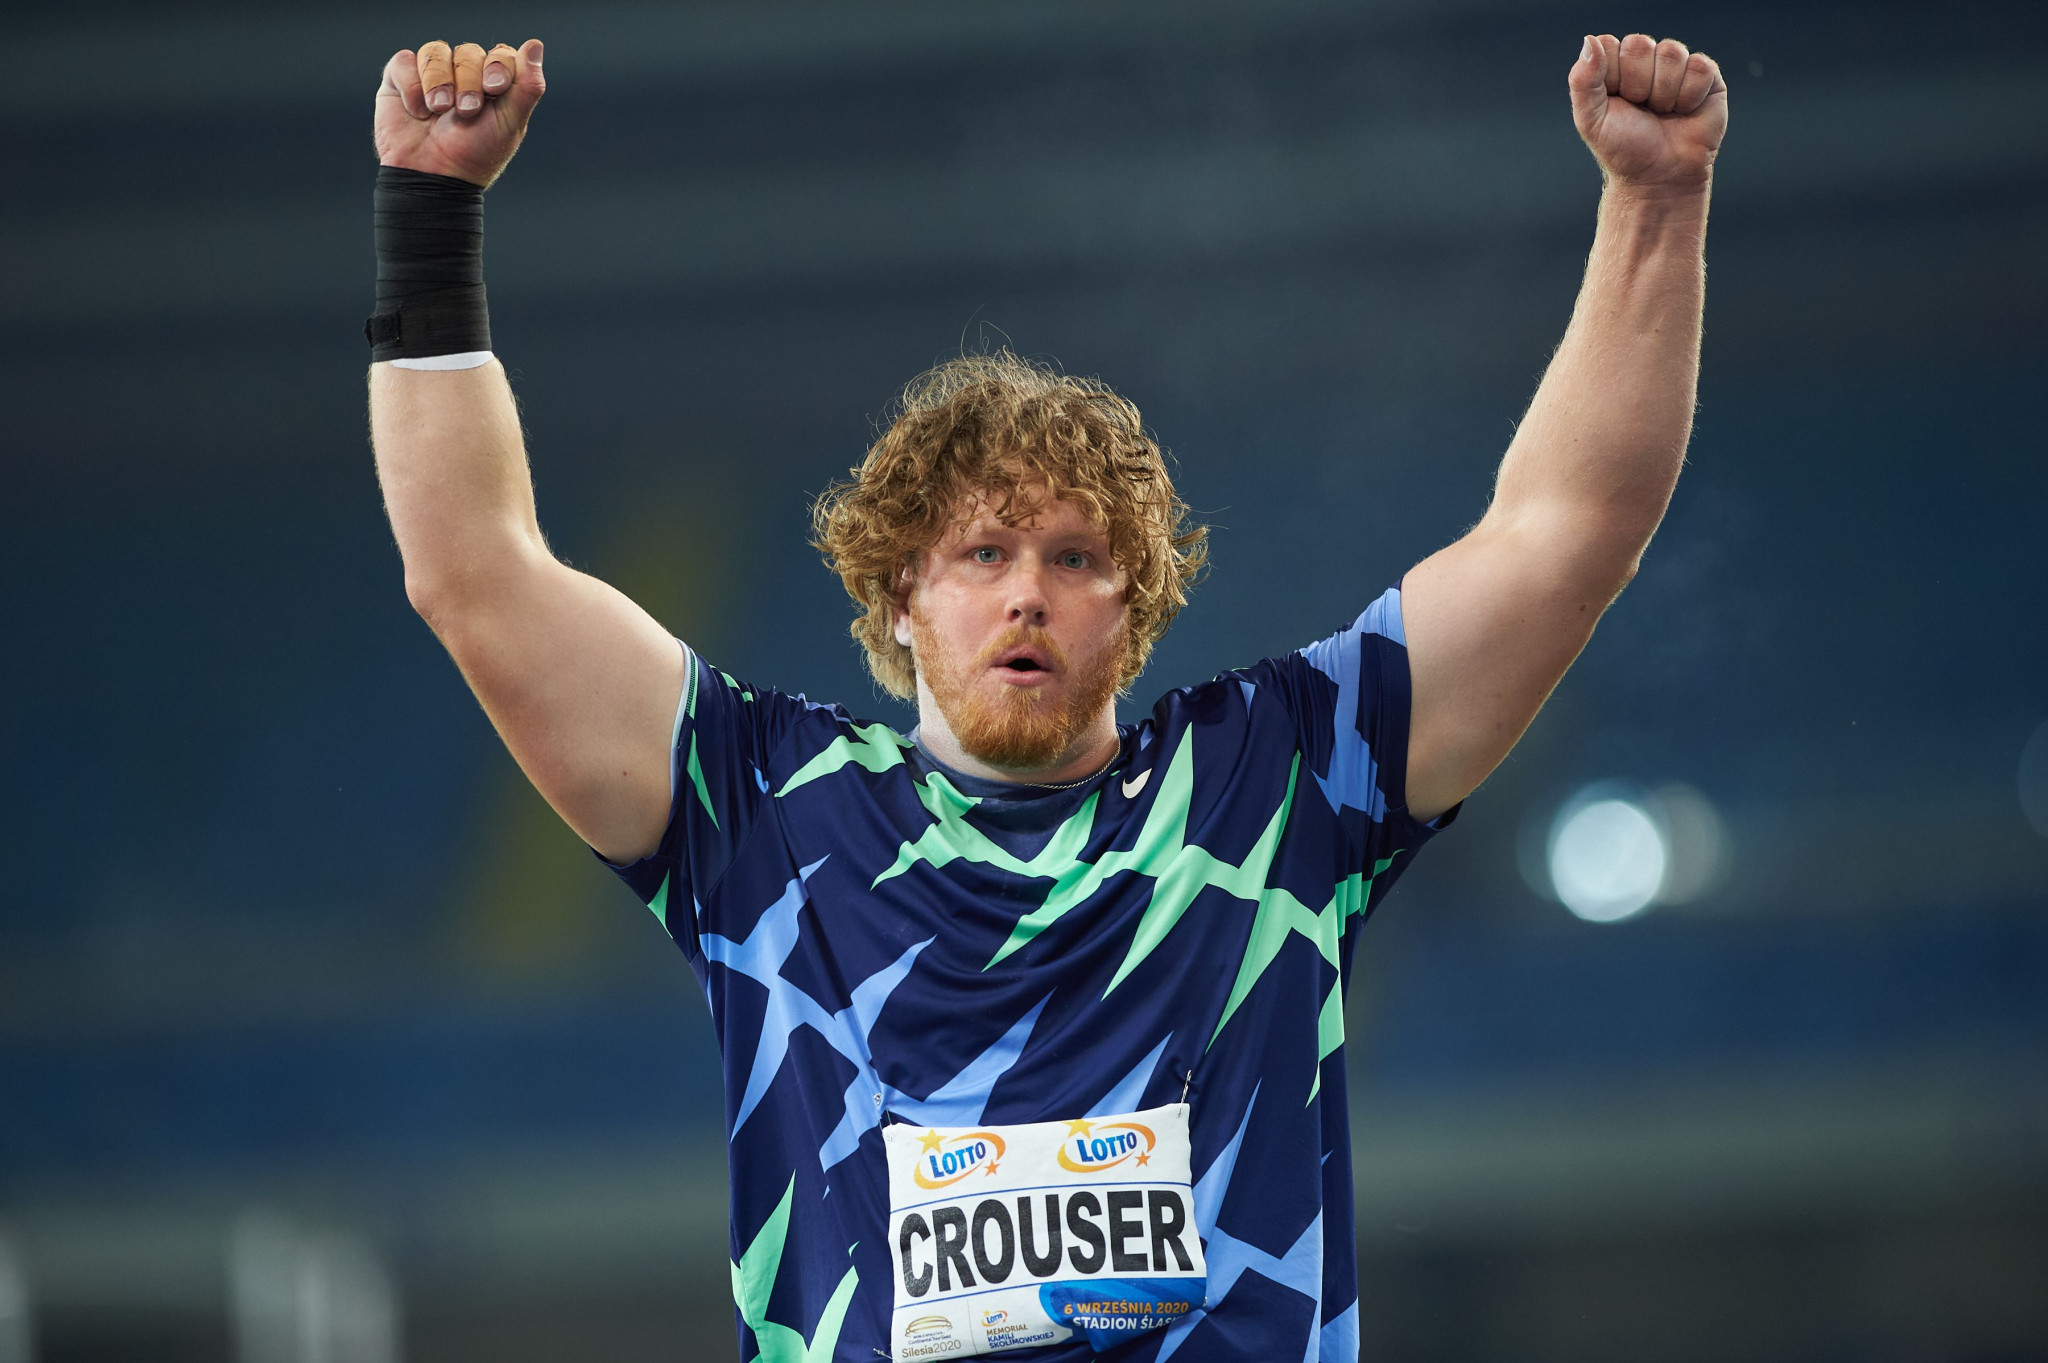 Ryan Crouser set a new indoor shot put world record with a 22.82m hurl ©Getty Images